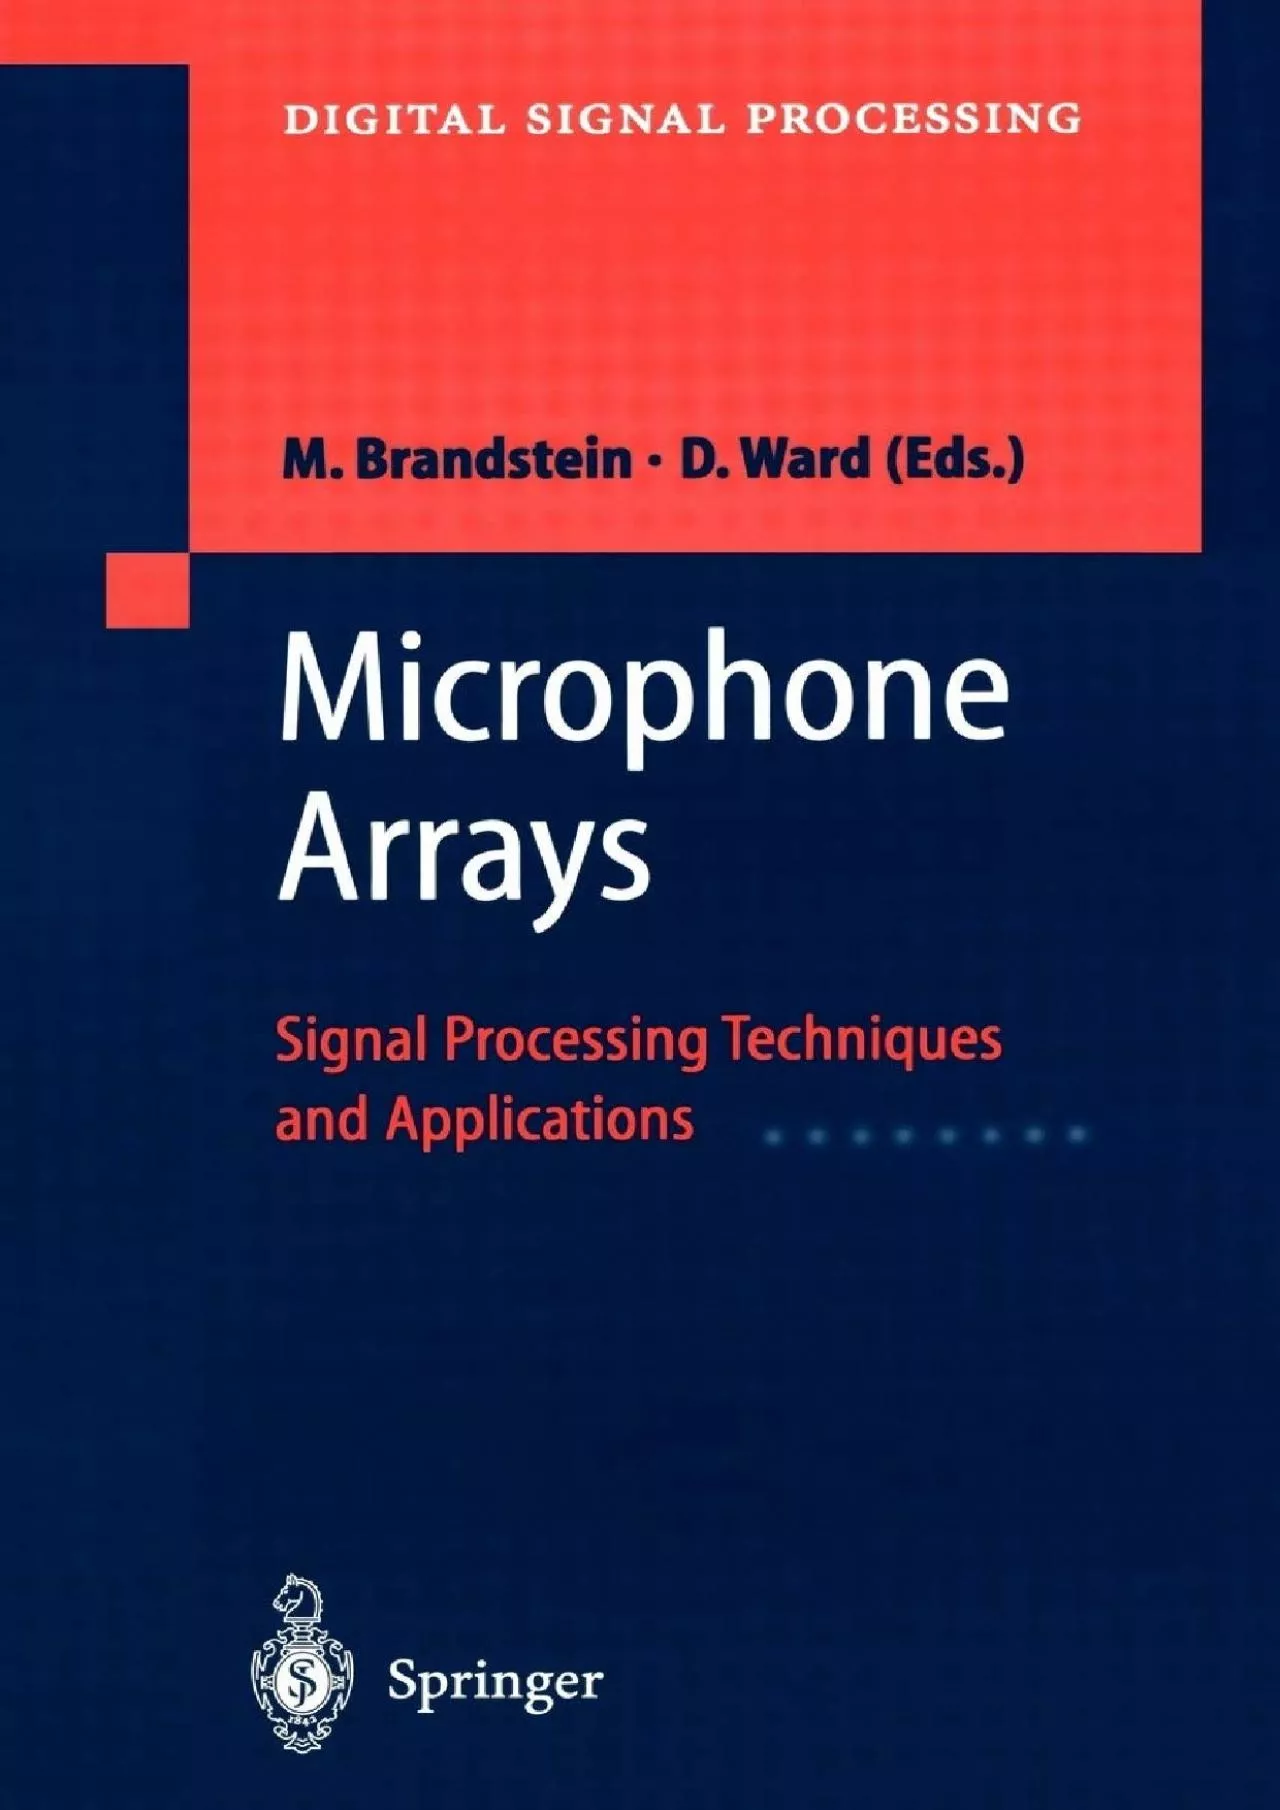 (BOOS)-Microphone Arrays: Signal Processing Techniques and Applications (Digital Signal